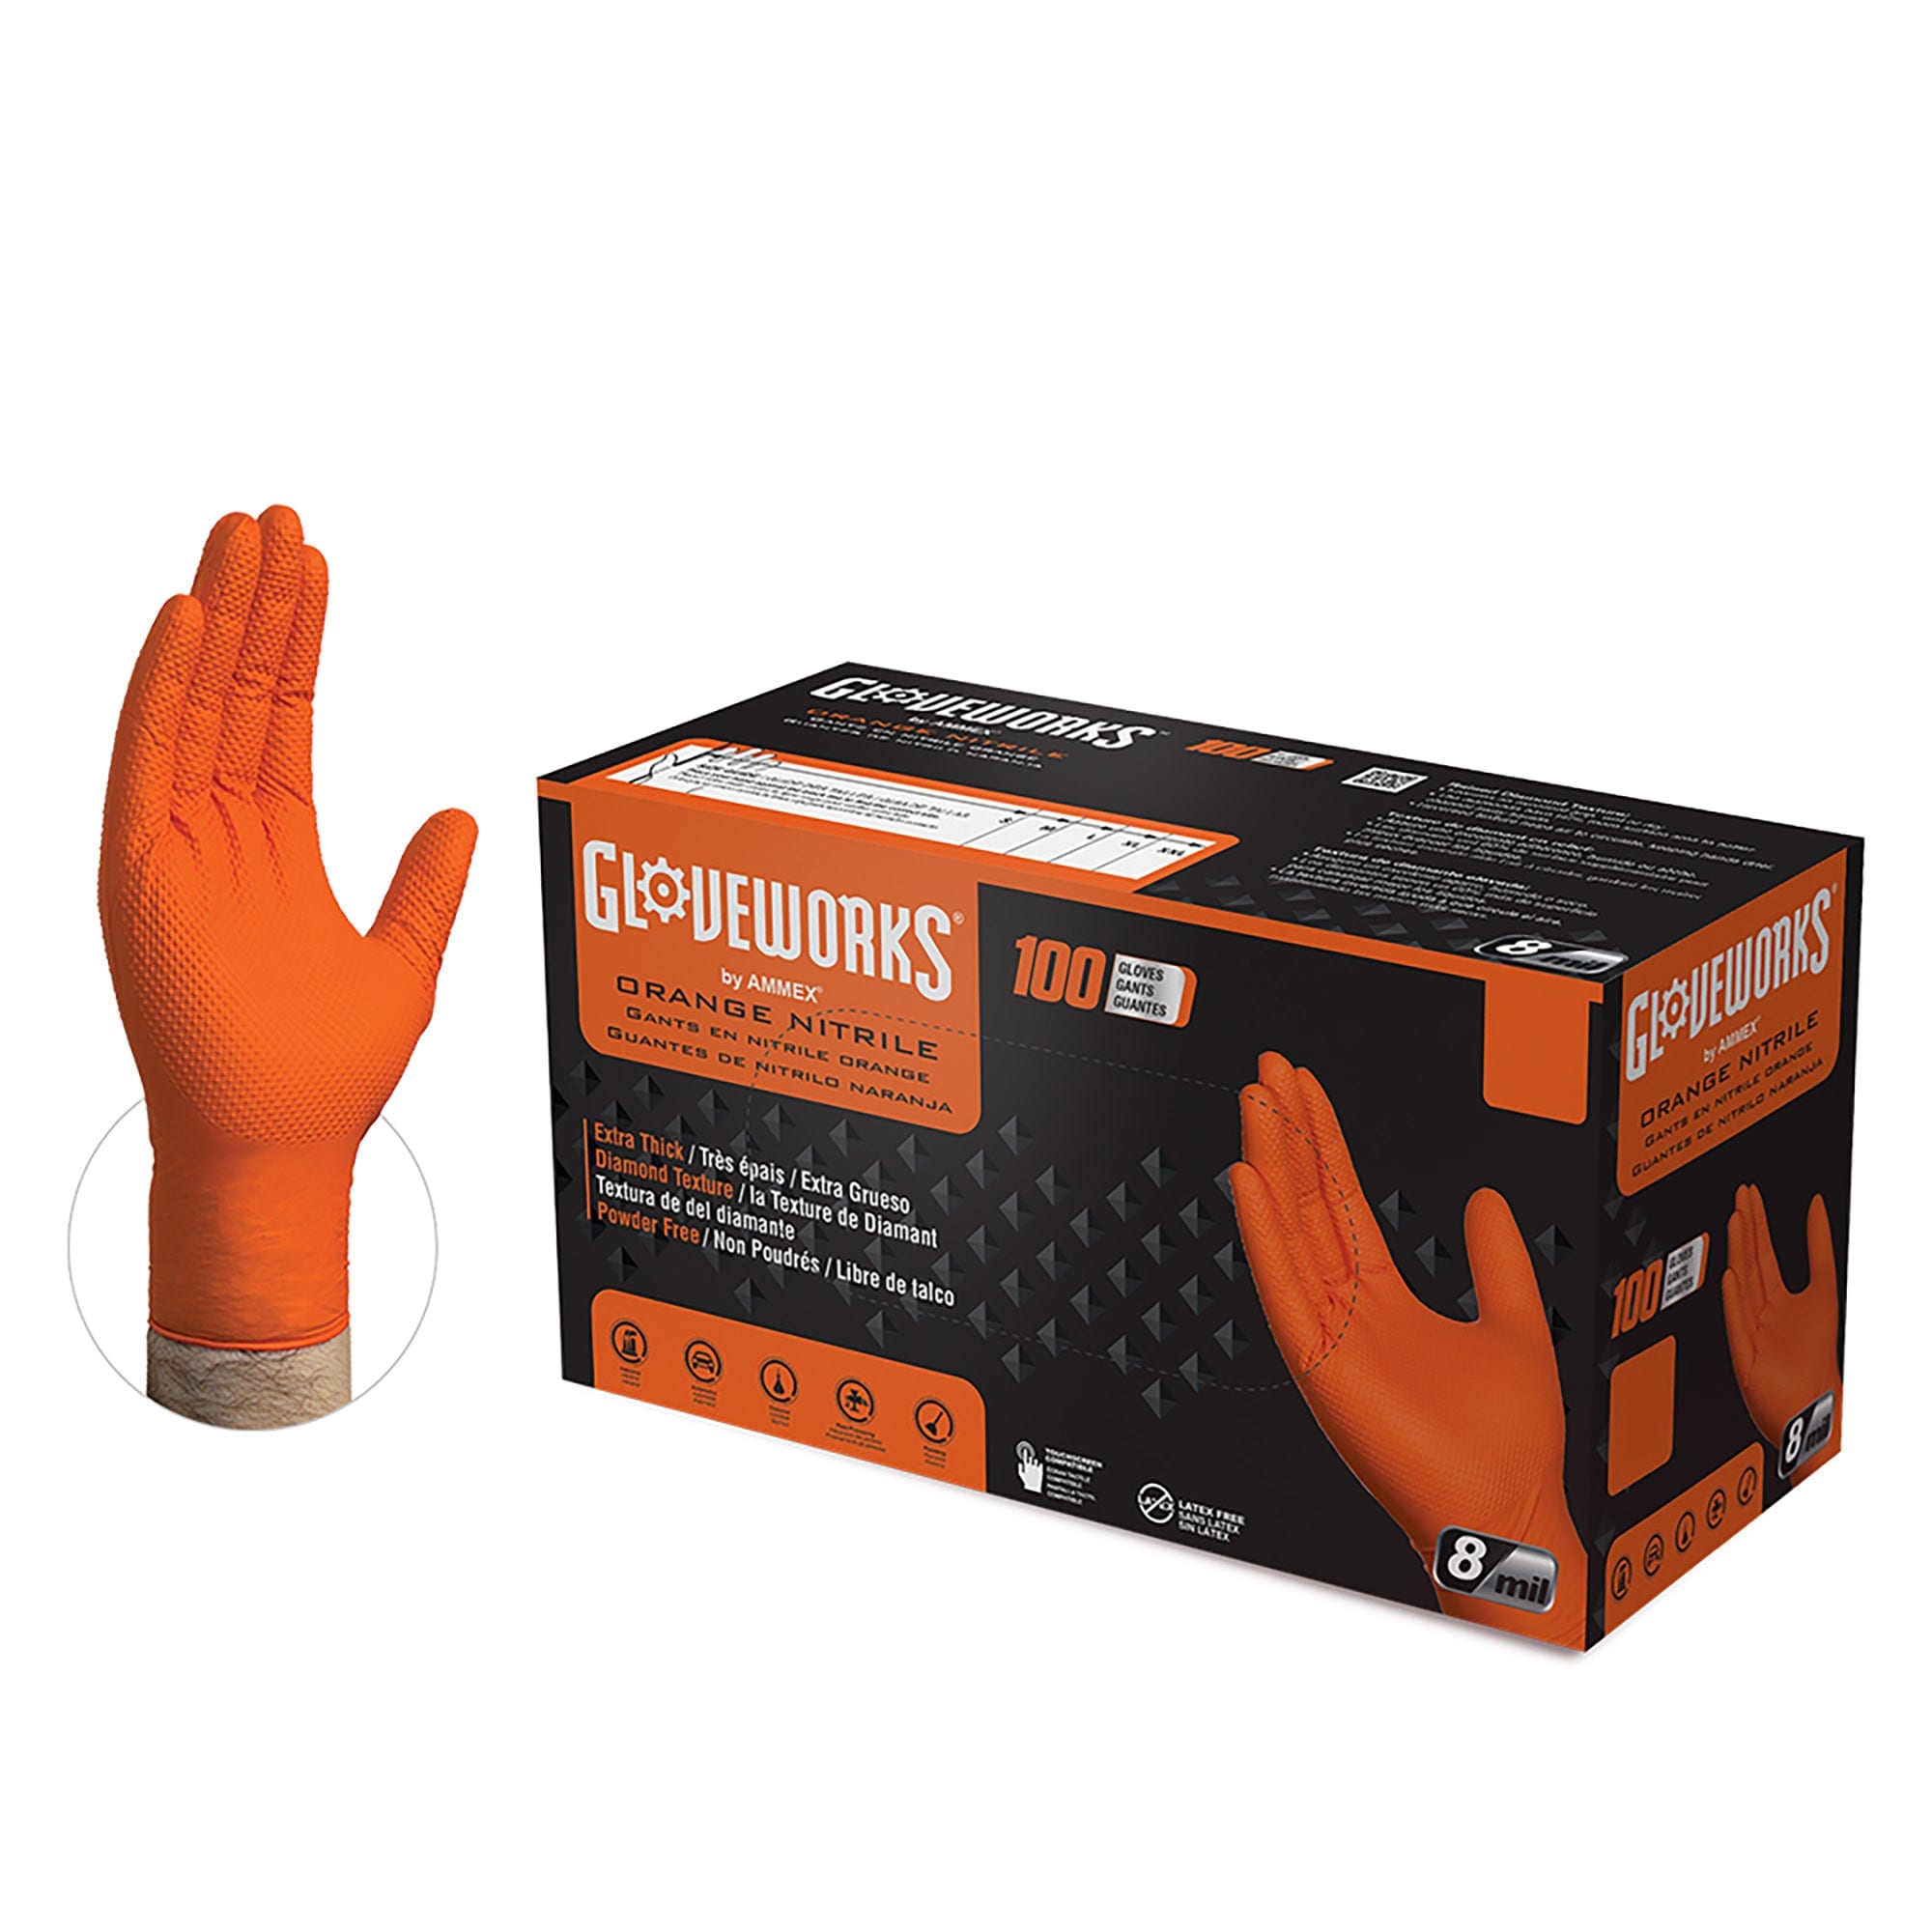 West Chester Orange Nitrile Dipped Gloves, 5-Pack